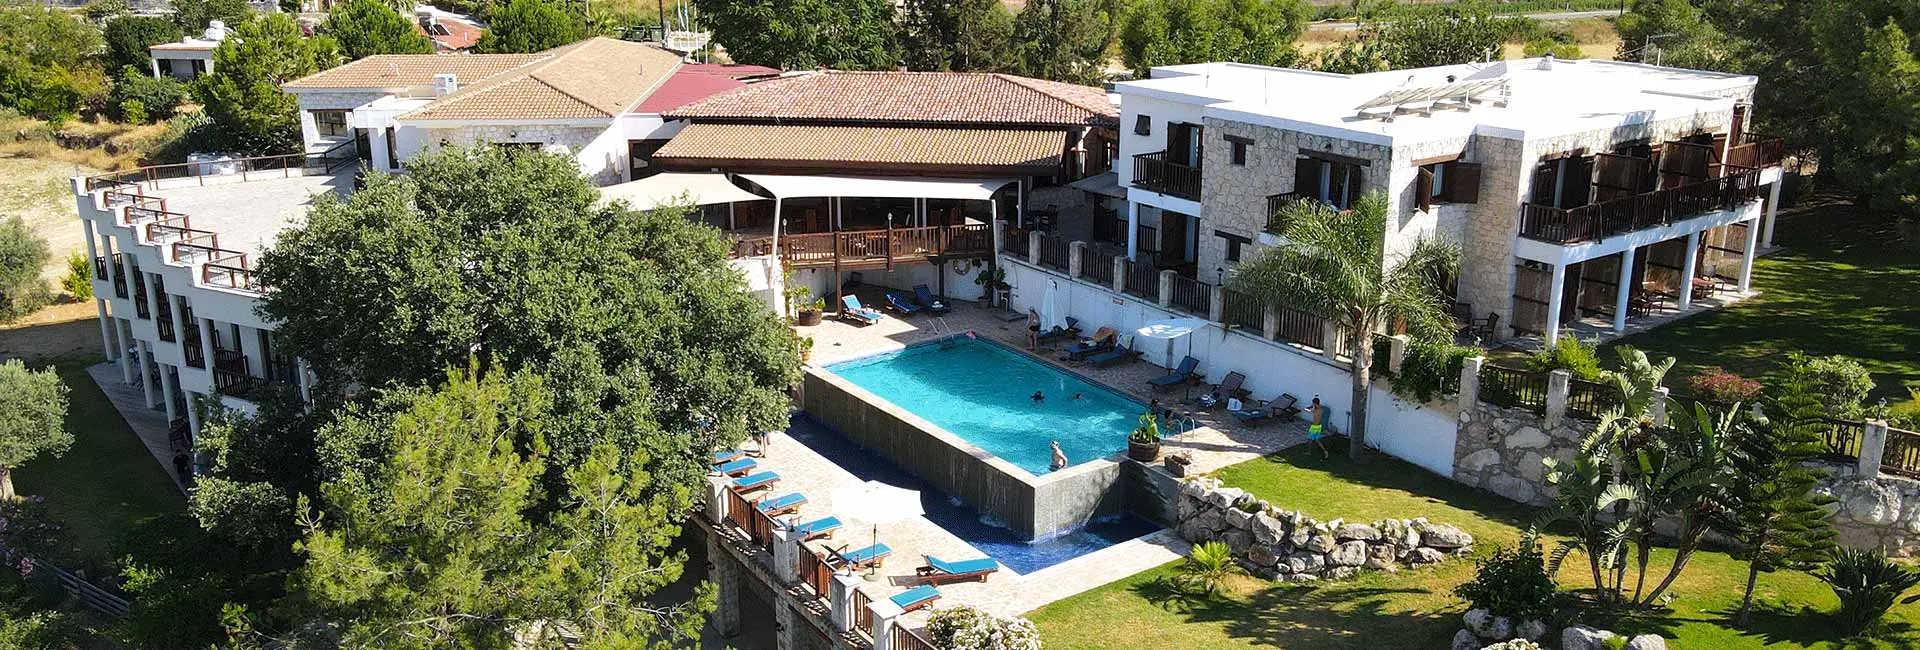  Paradisos Hotel & Retreat, Lysos - THE CYPRUS EXPERIENCE - Firefly Wellness Retreats - 7 NIGHT YOGA AND WELLNESS RETREAT. | JUNE 8th to 15th 2024 | Rediscovering Your Light - Telephone Bookings: +447800 974 996 or +357 99 289134  | Email:hello@fireflywellnessretreats.com  